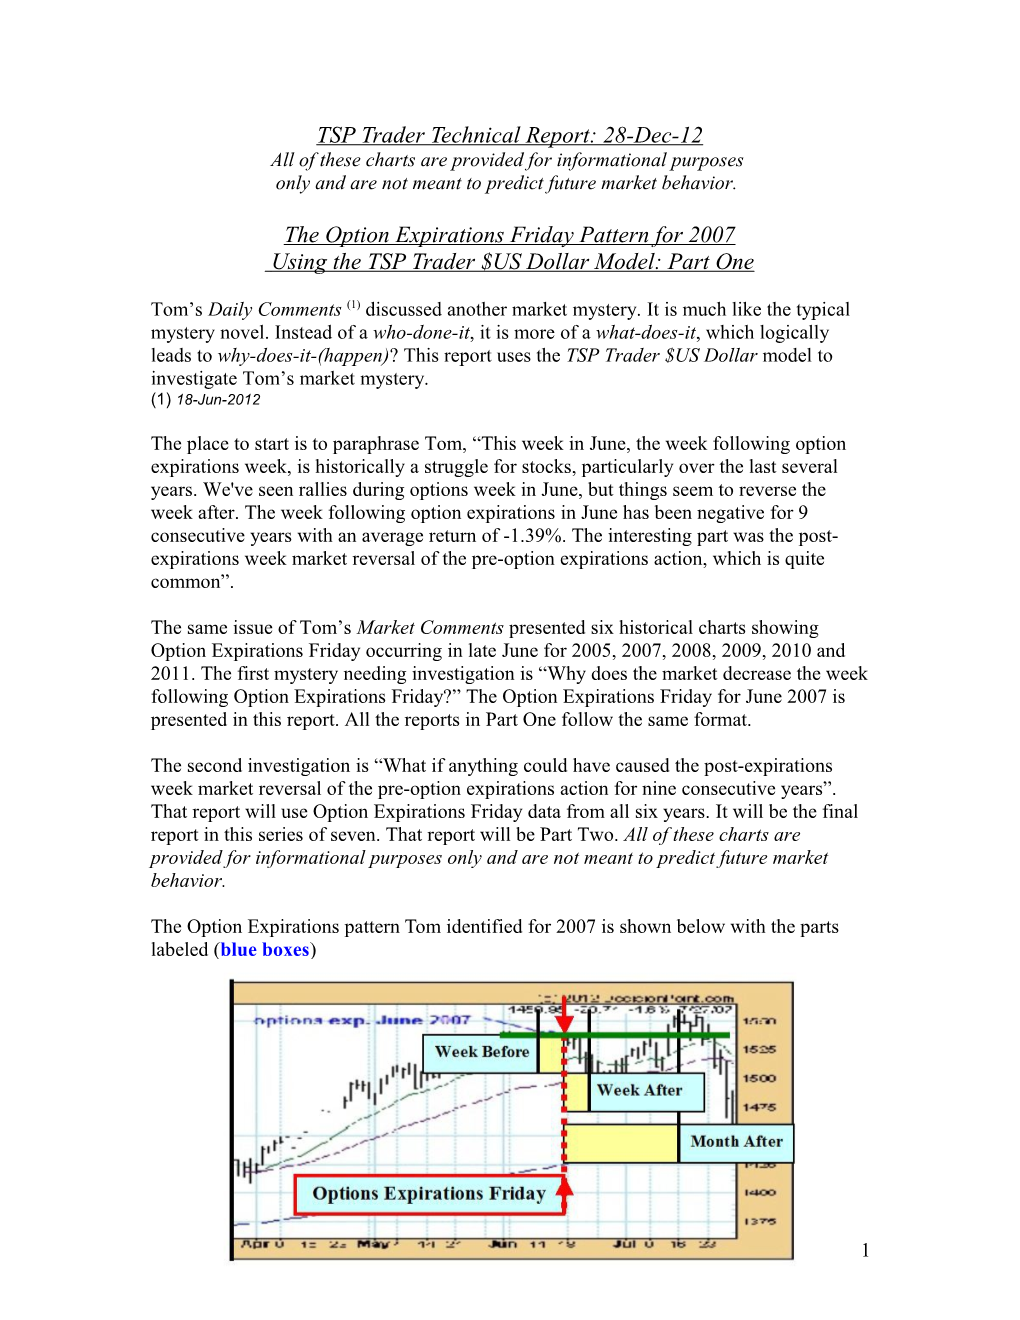 In Tom S Market Comments for June 15, 2012, He Presented Seven Historical Inverse Head